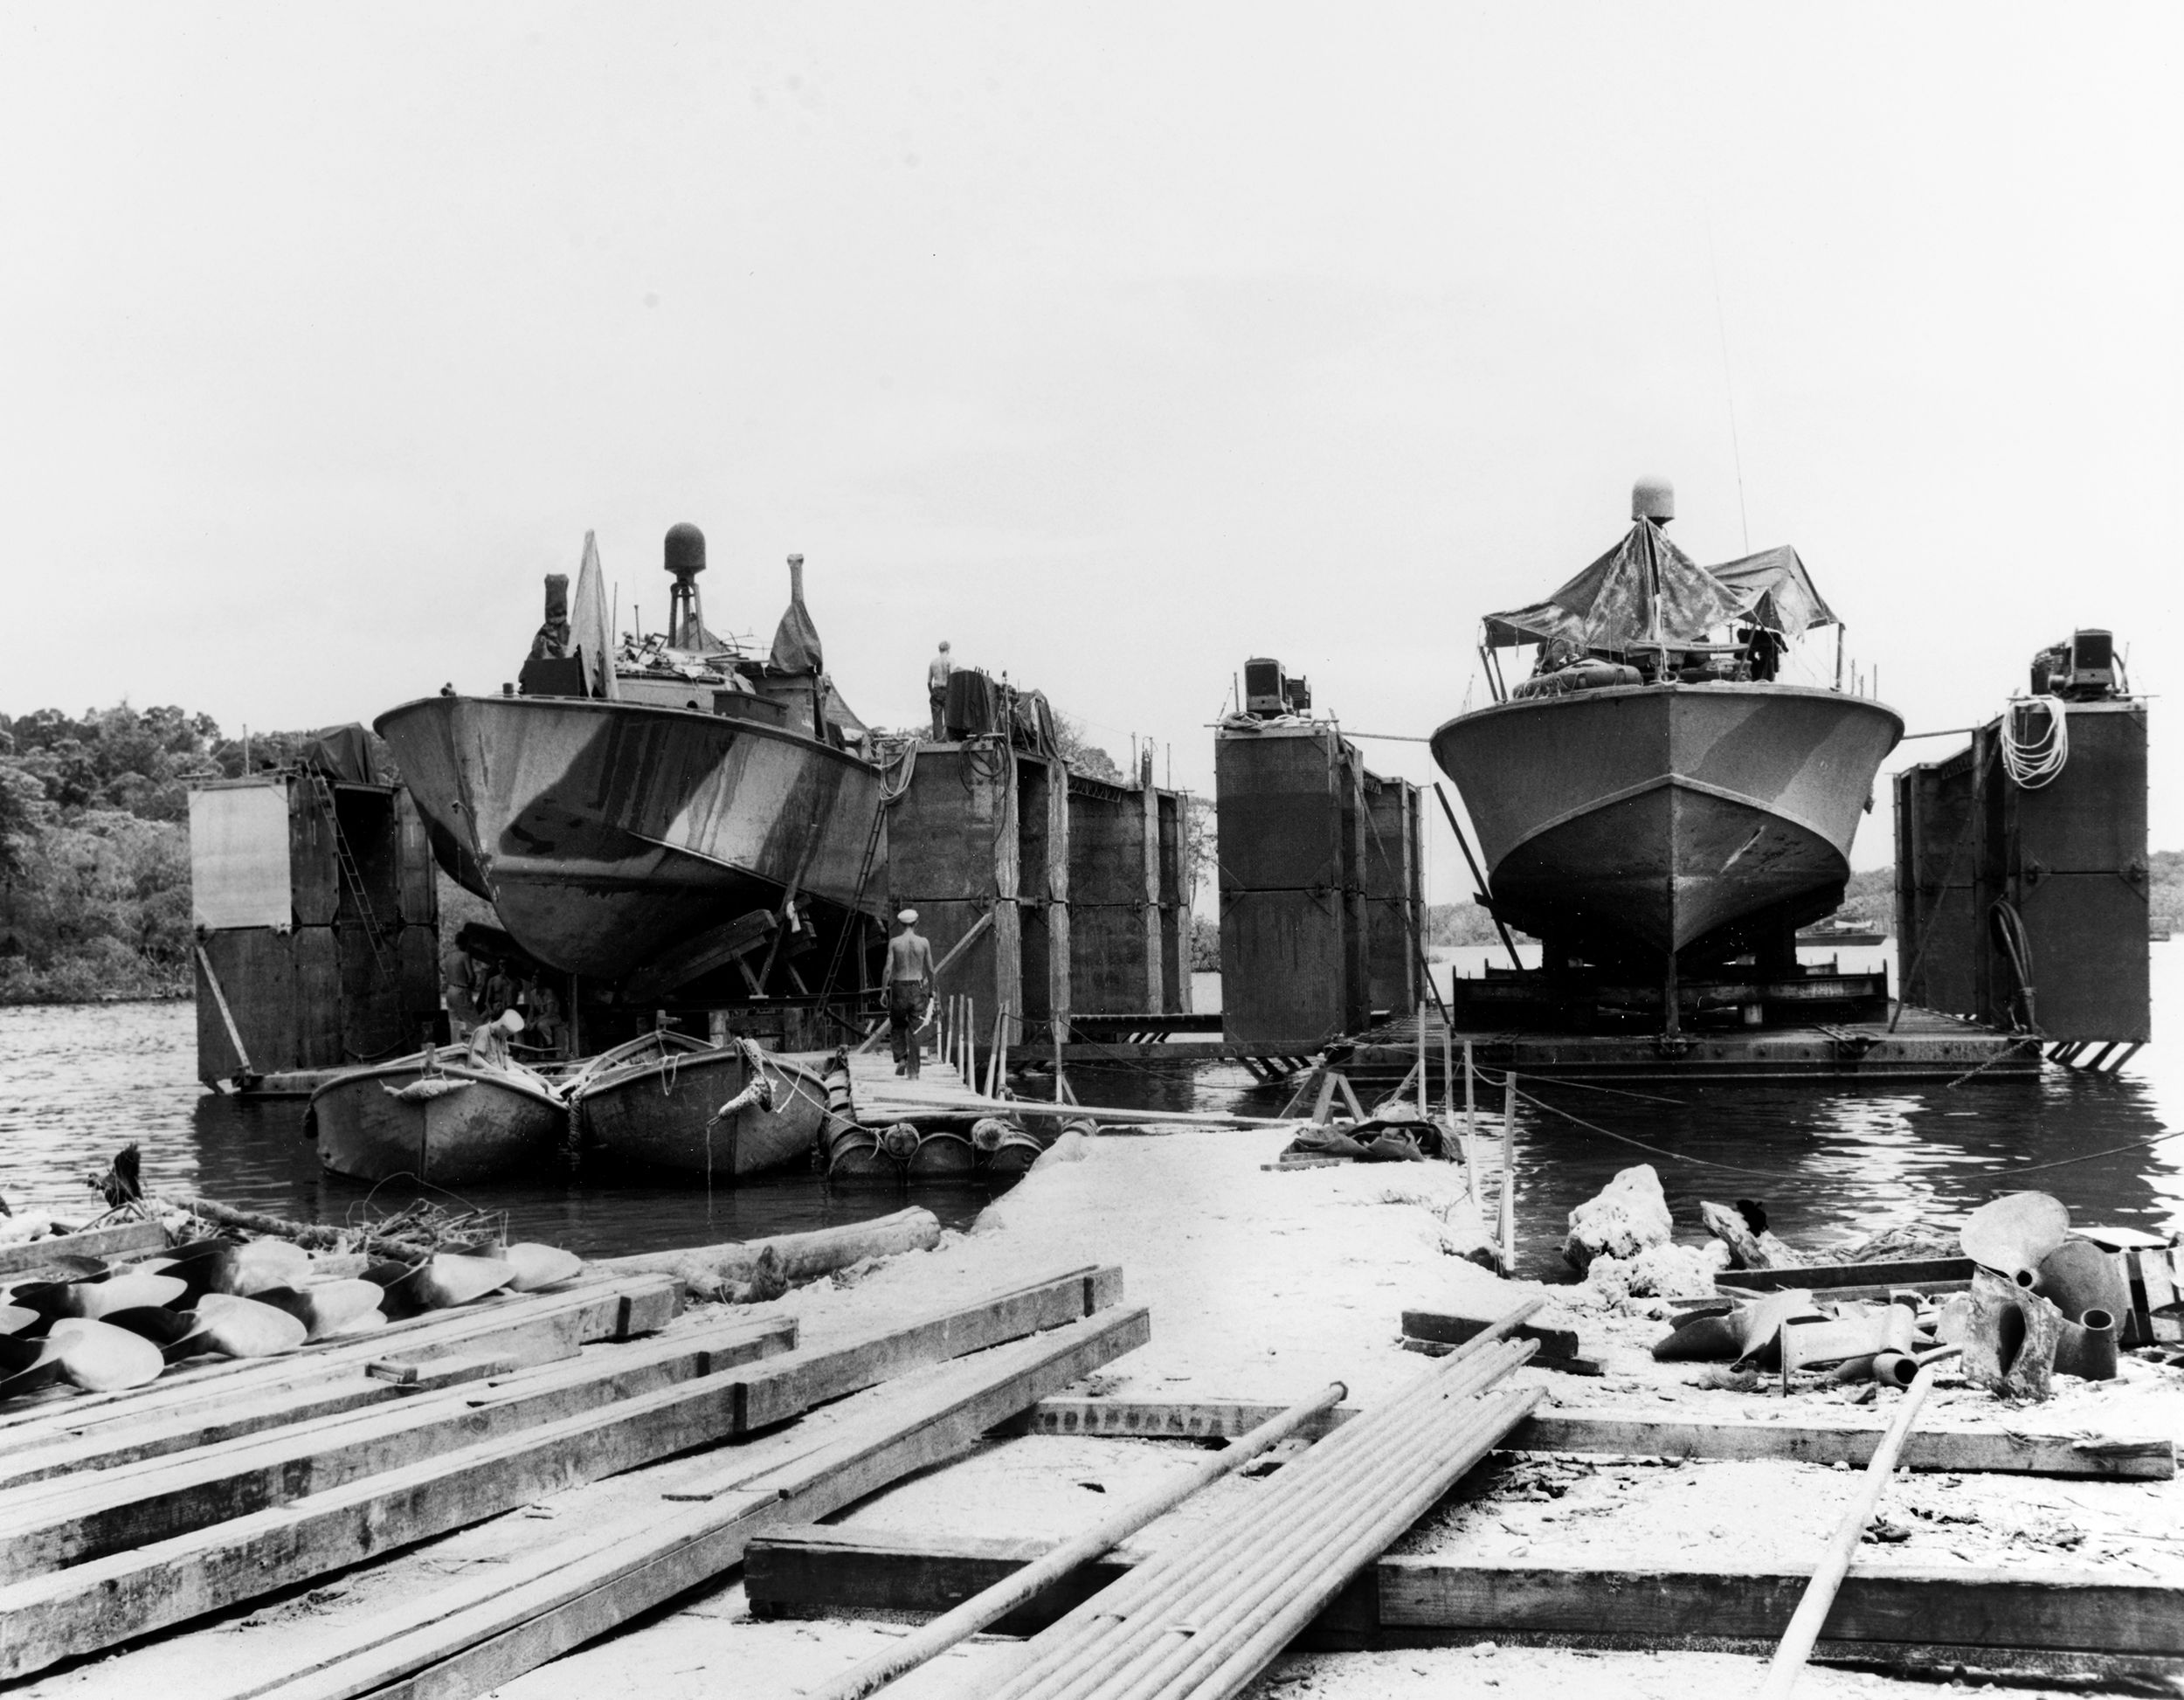 This photo depicts PT-boats in floating drydocks at the Rendova base in the central Solomons in 1943. The PT-boats were swift and heavily armed, providing firepower and surveillance during the fight to wrest control of the Solomons from the Japanese. 